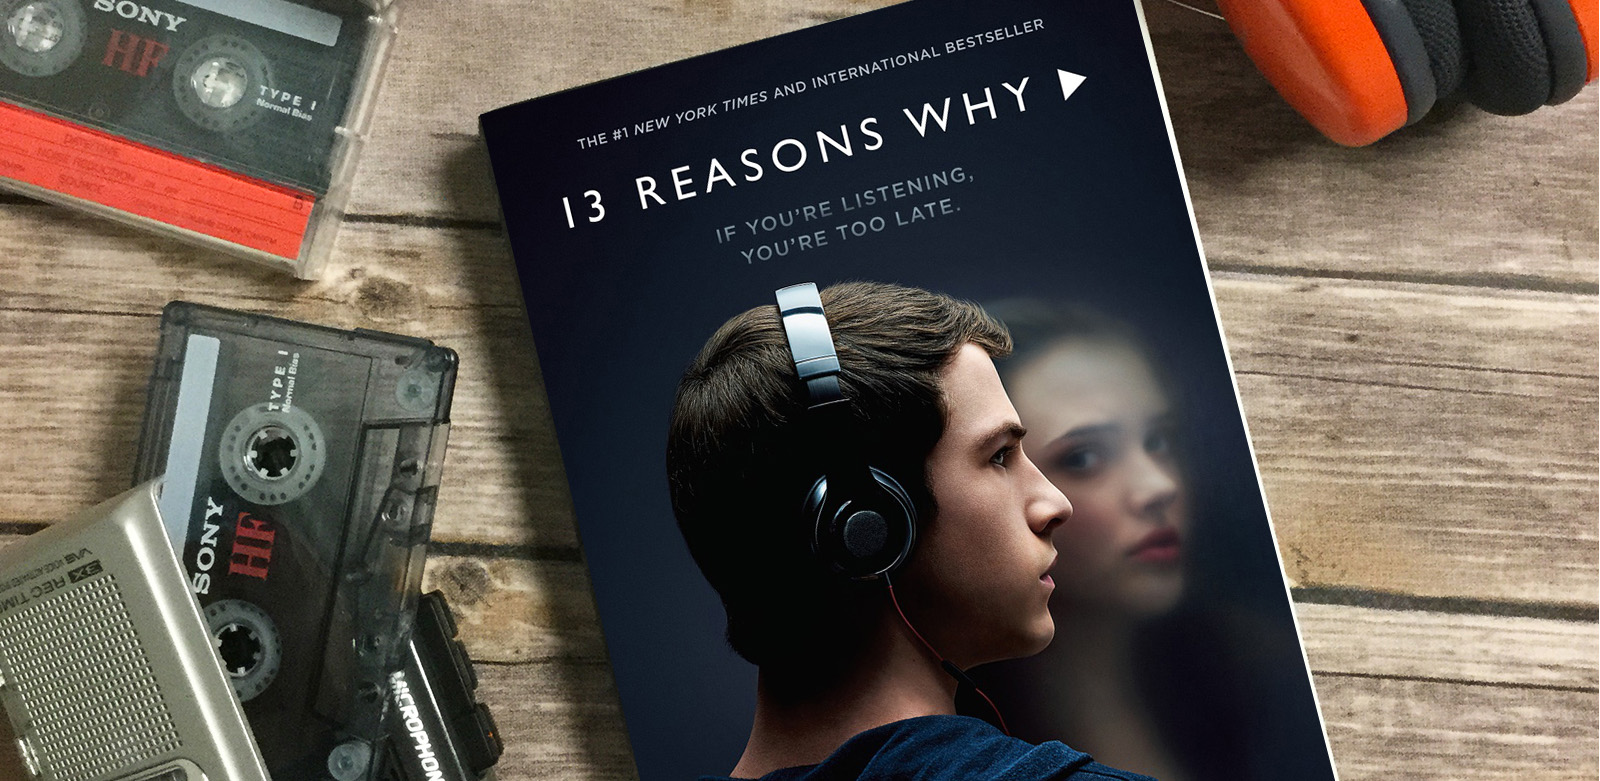 when will 13 reasons why season 2 be on netflix